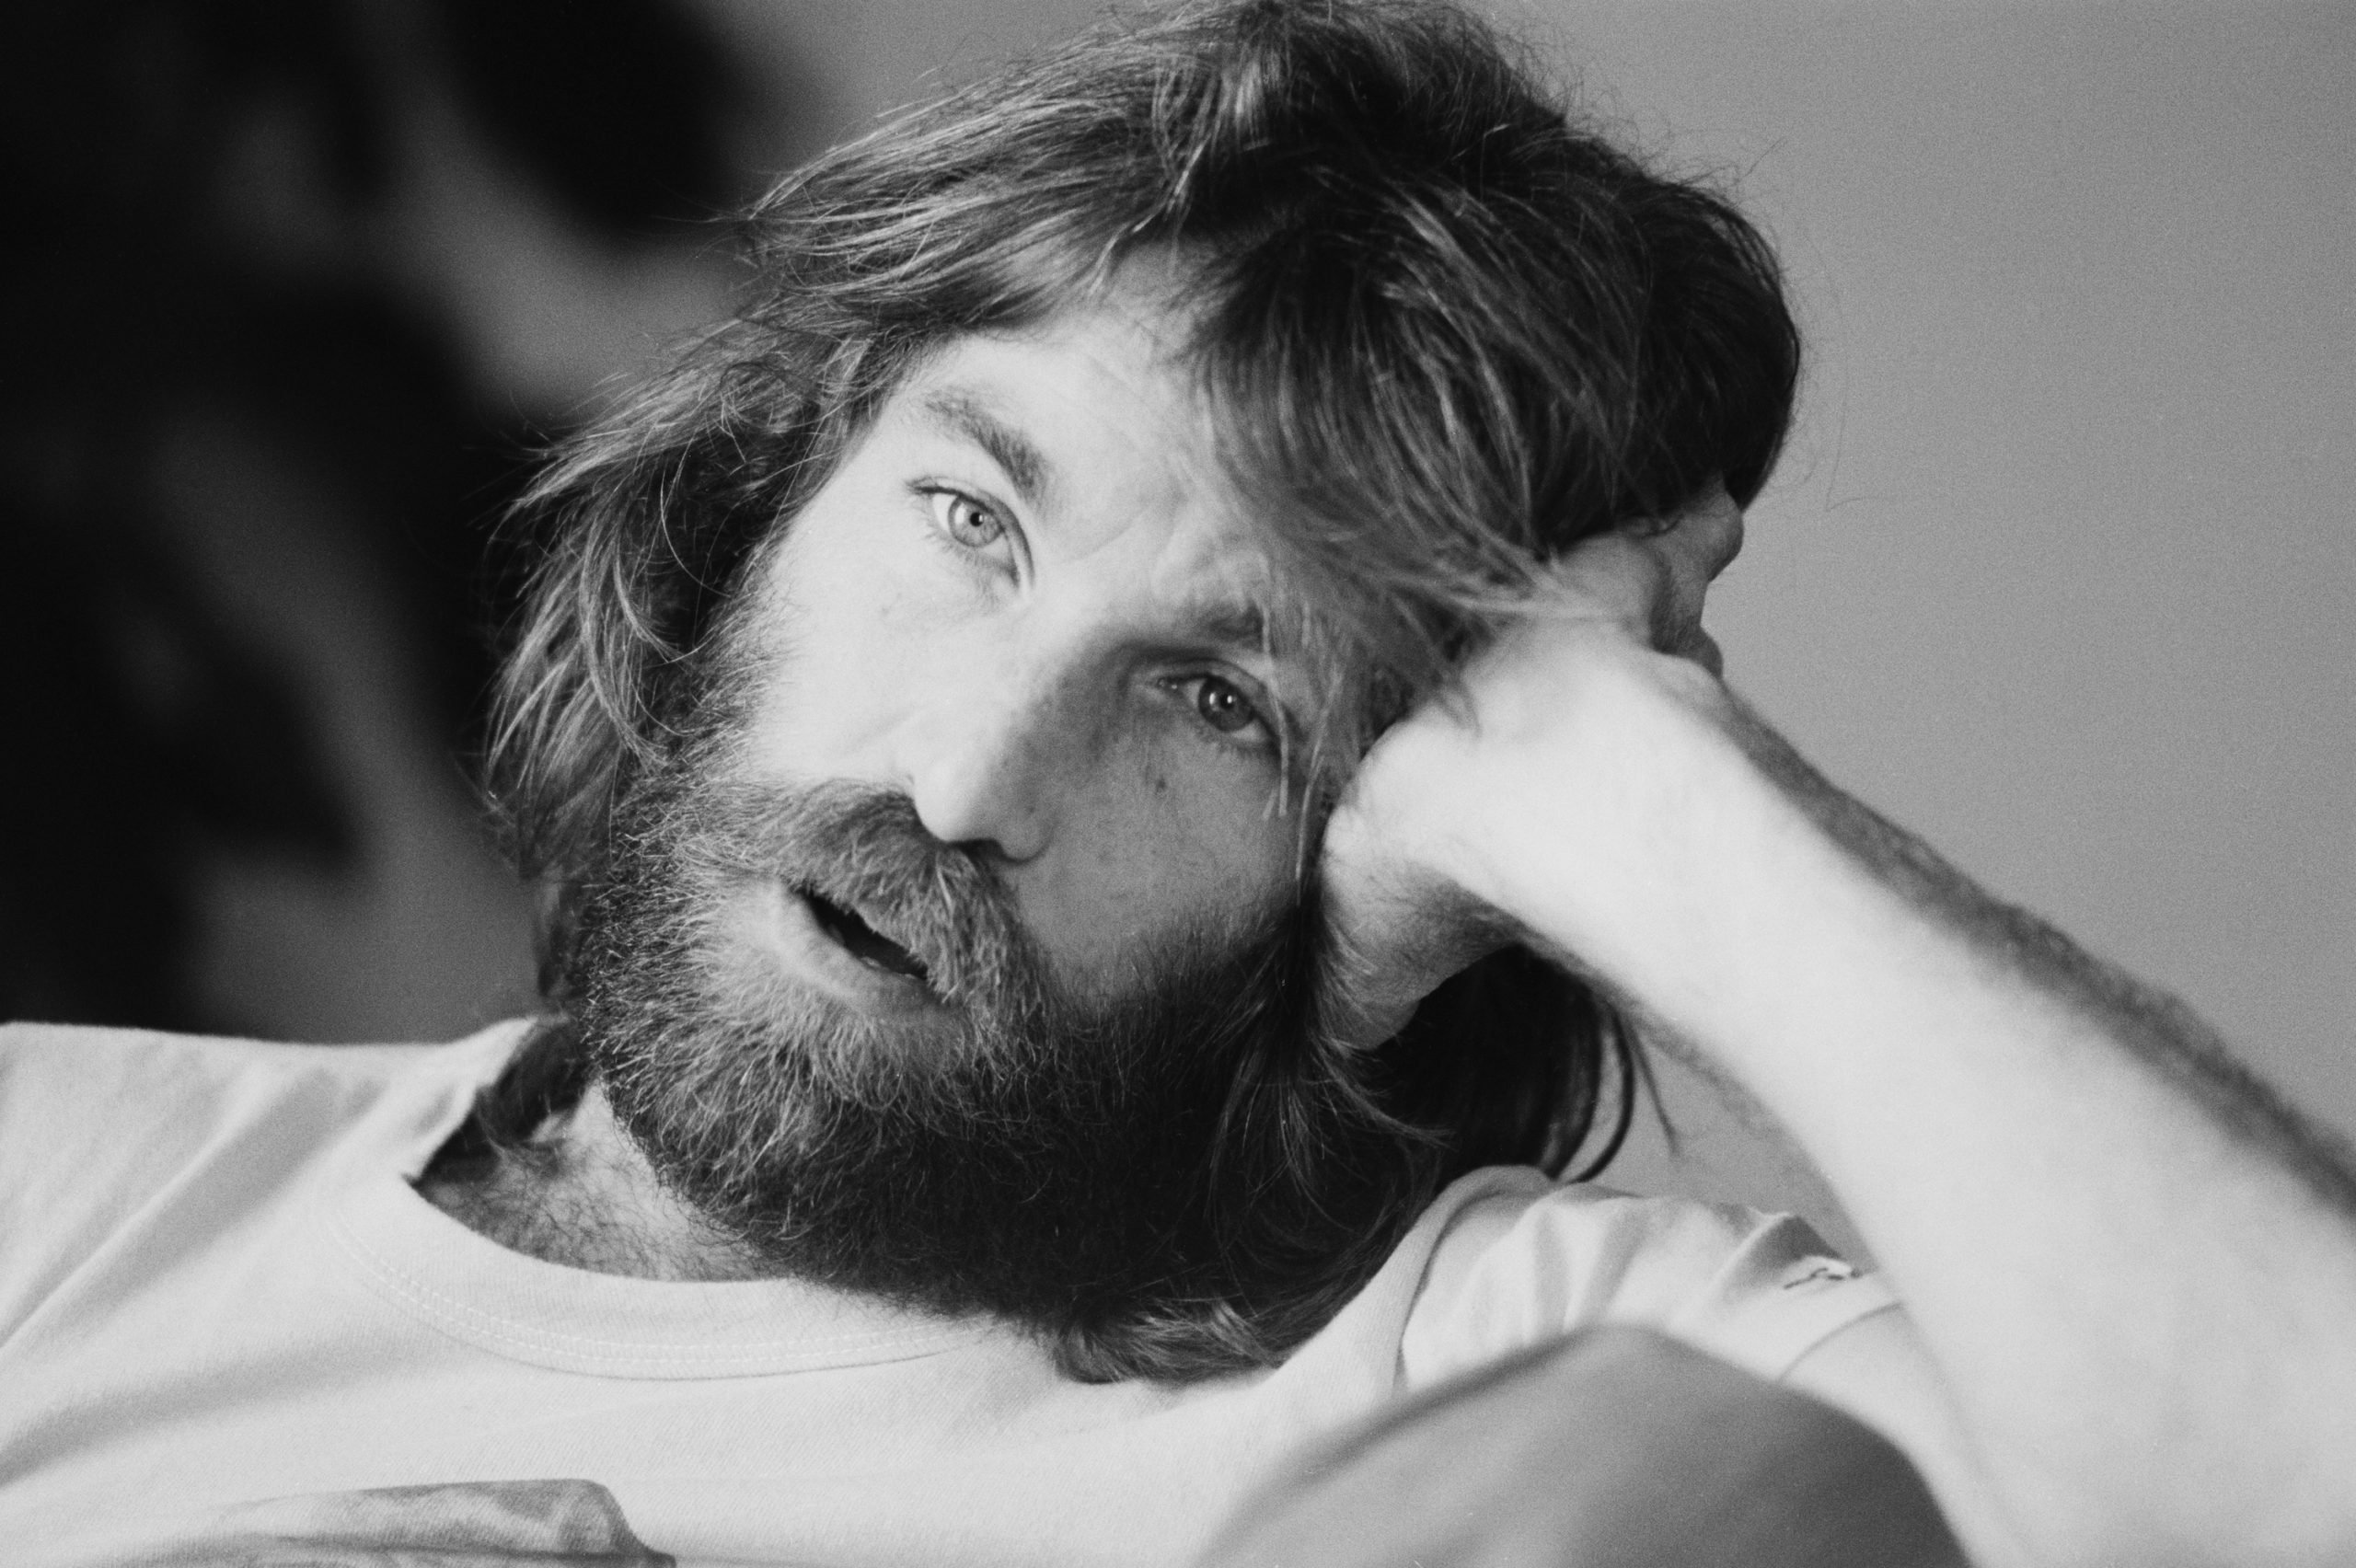 American singer, songwriter and drummer with the Beach Boys, Dennis Wilson (1944 - 1983)American singer, songwriter and drummer with the Beach Boys, Dennis Wilson (1944 - 1983)